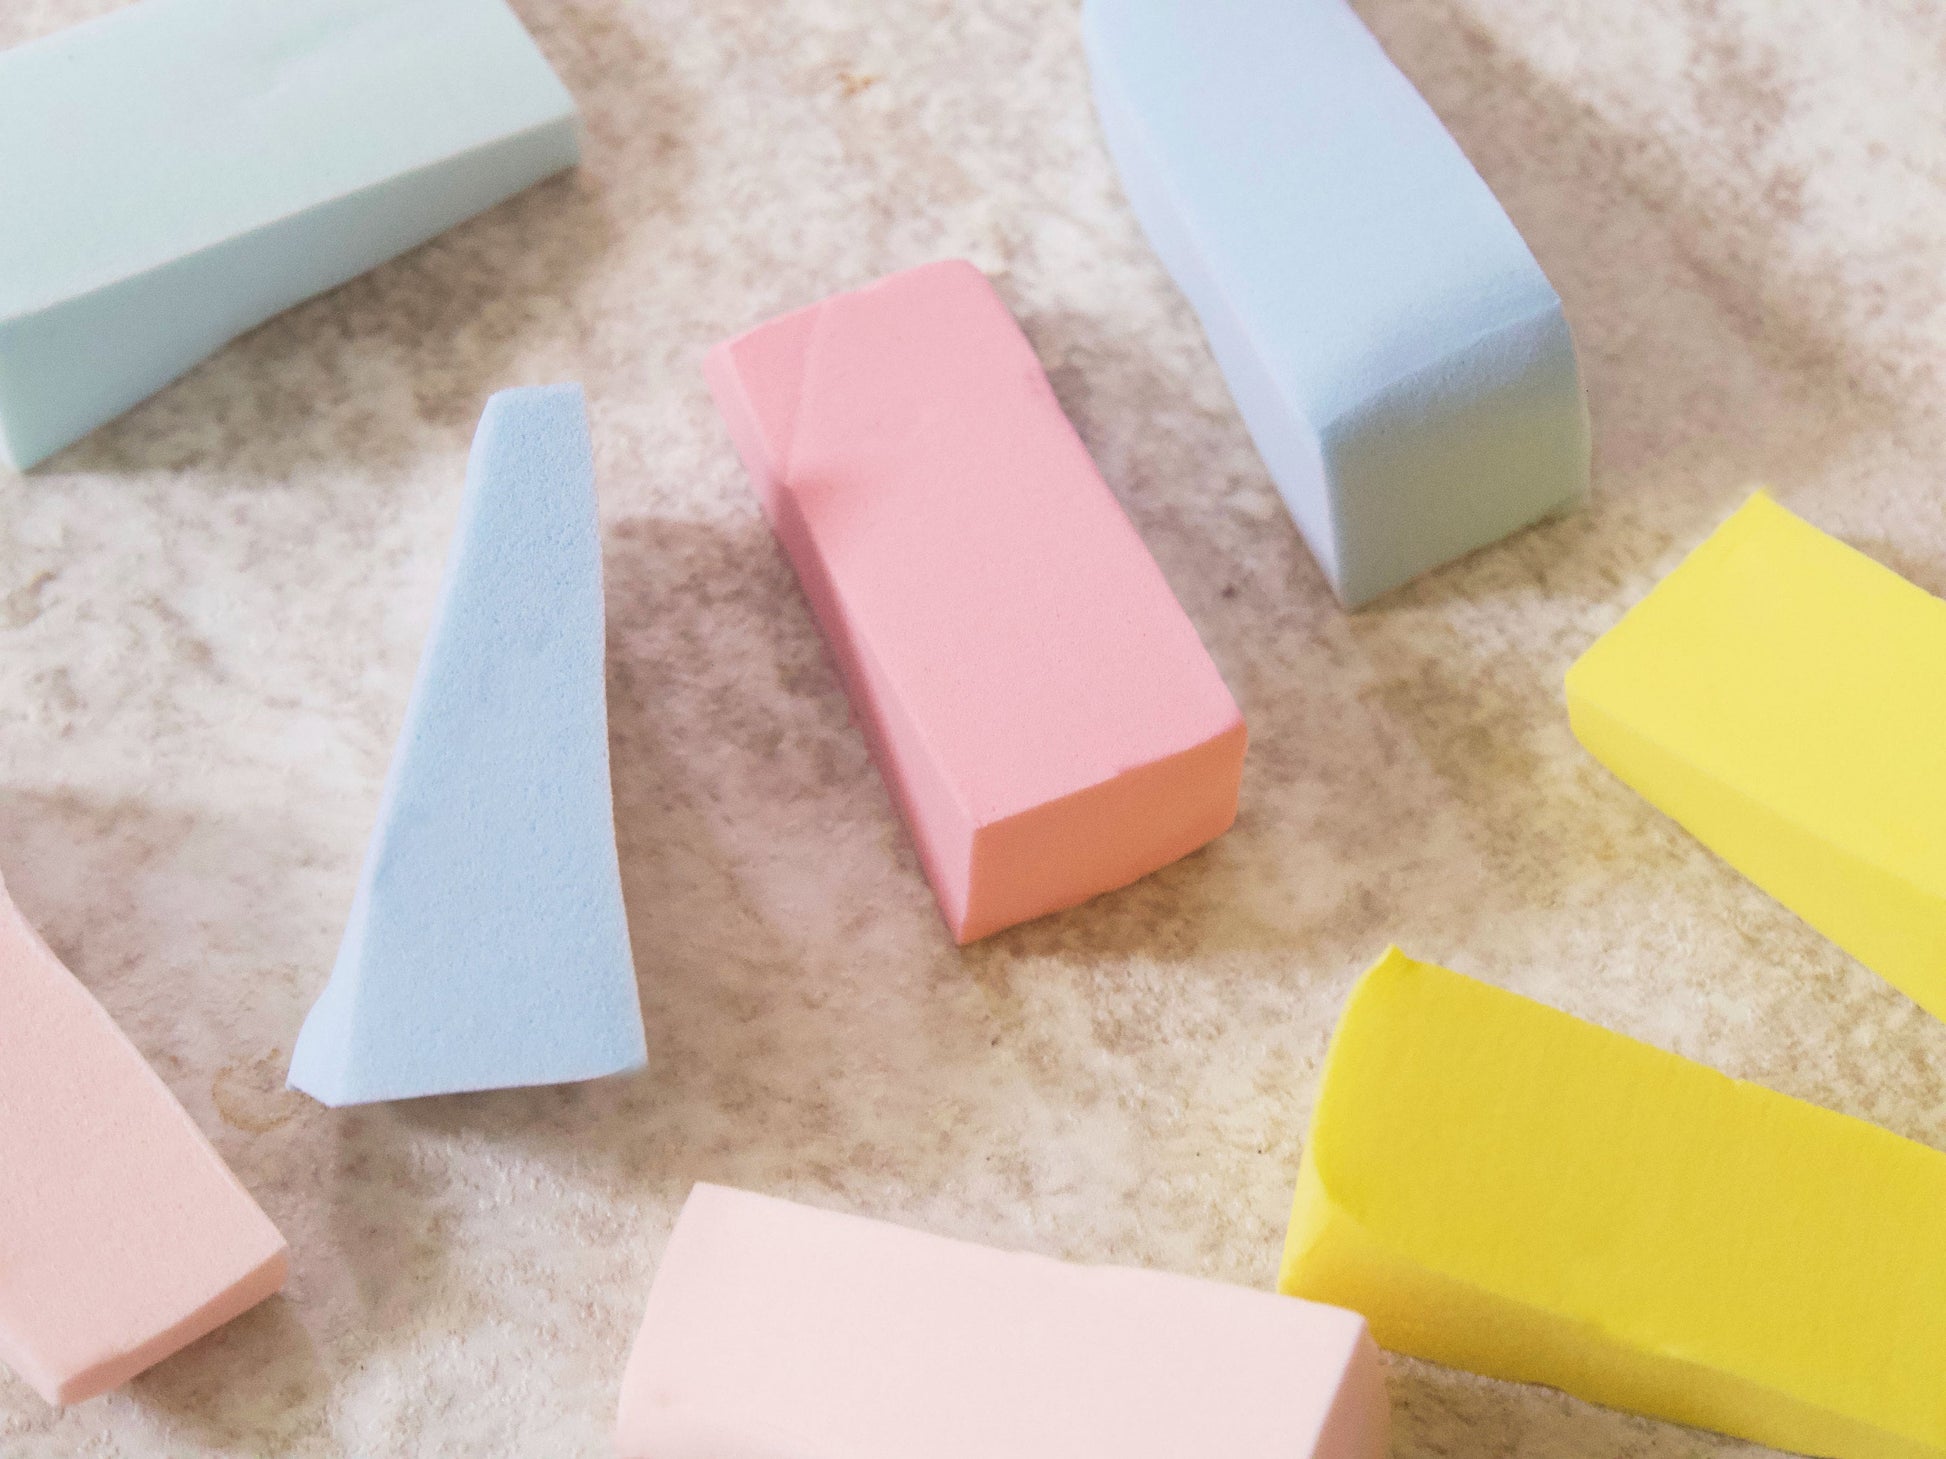 5pcs Triangle Sponge for Ombre Gradient Nail Art/ Color Fading Ombré Shade Latex Free Foam Cosmetic Wedges Sponges